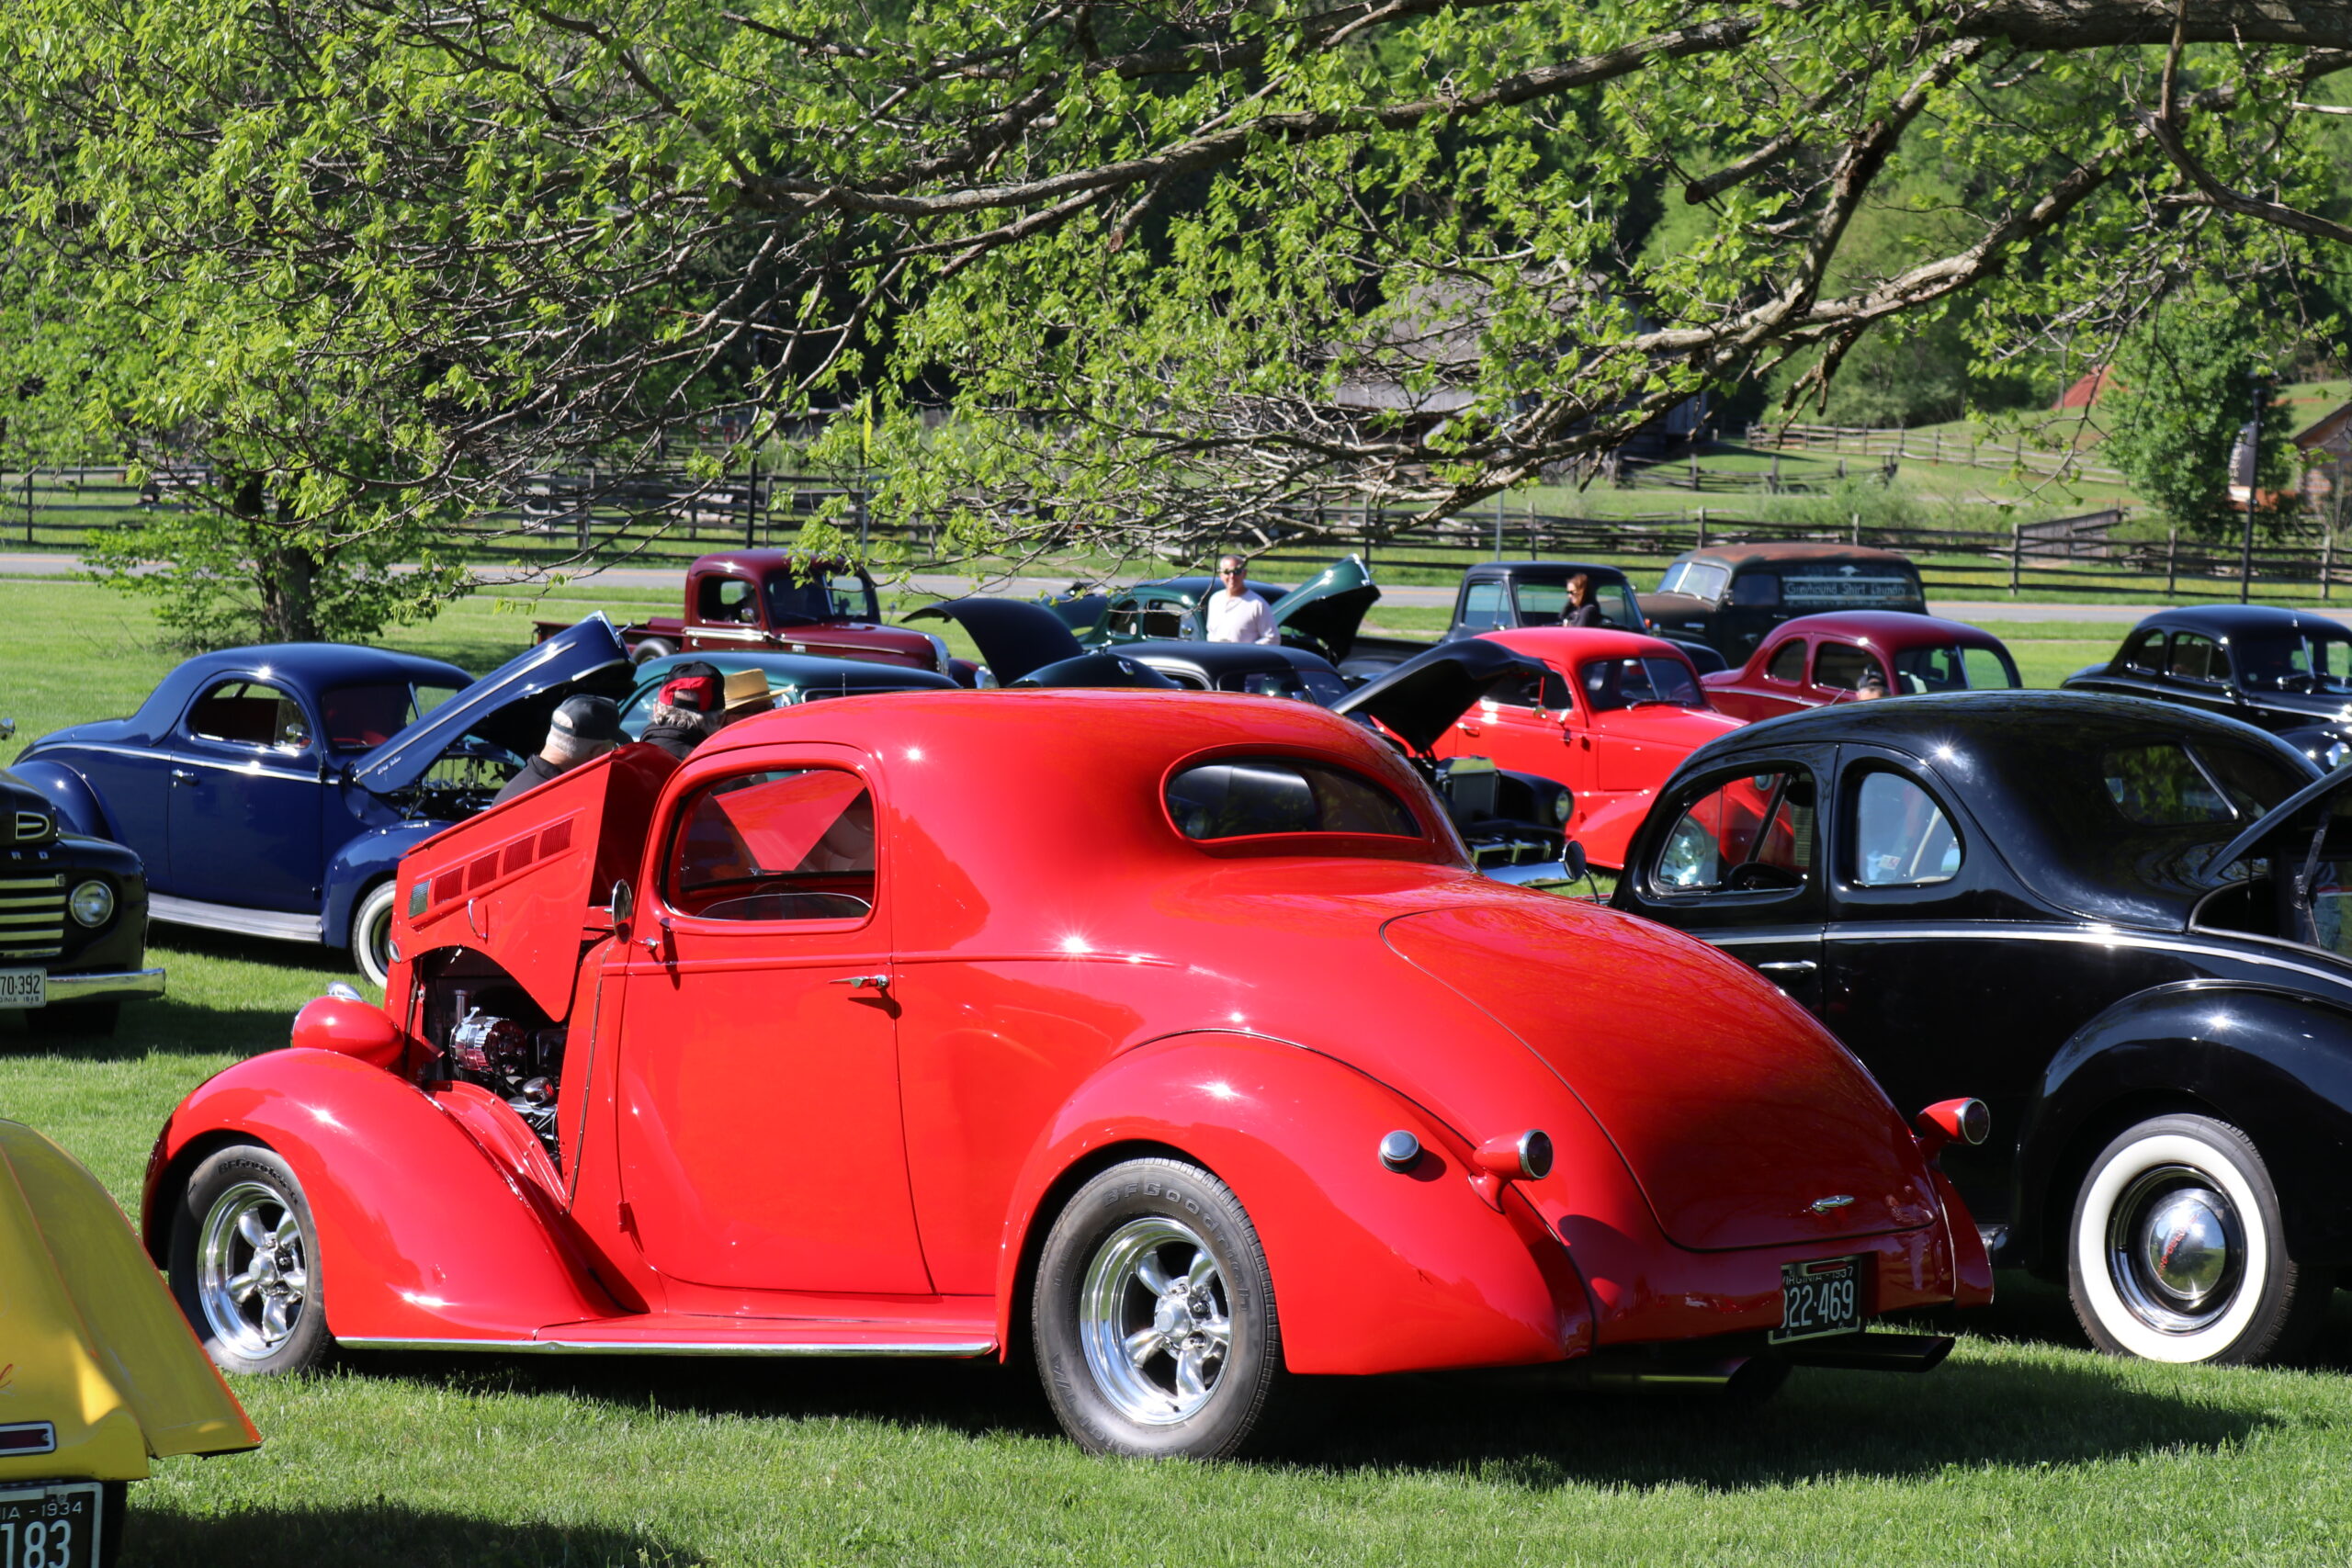 A number of classic cars parked in a field.